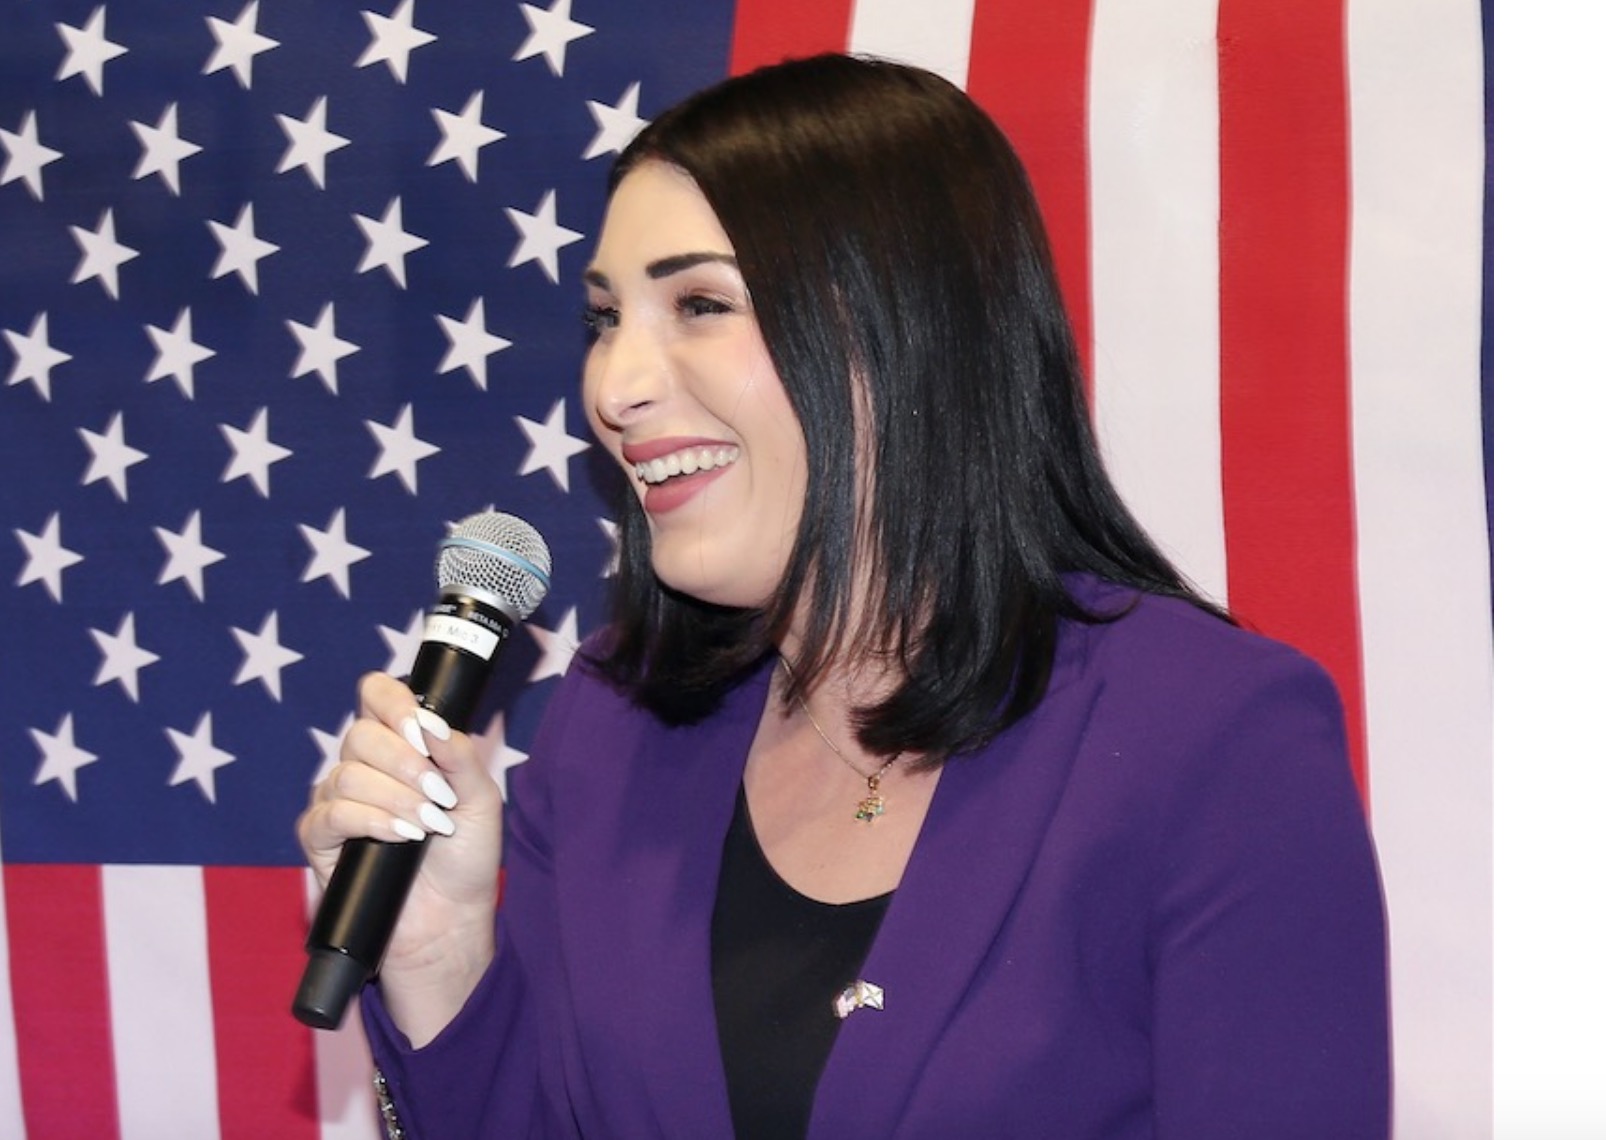 NRCC continues to ignore Laura Loomer even as she surges in polls